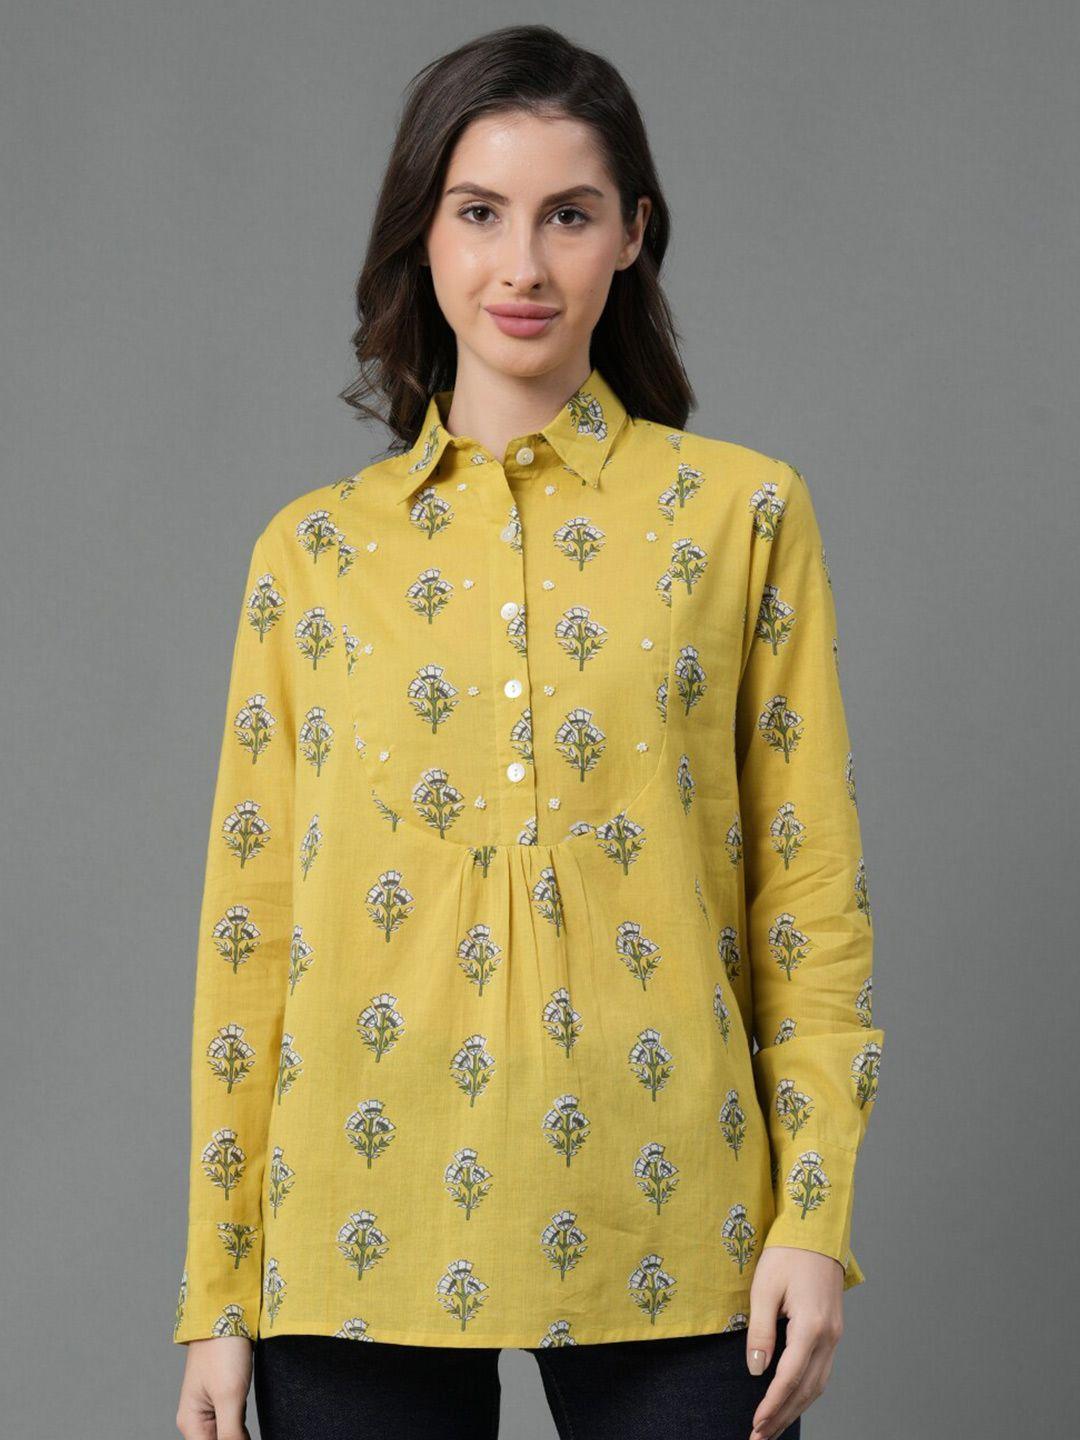 mode by red tape floral printed pure cotton shirt style top